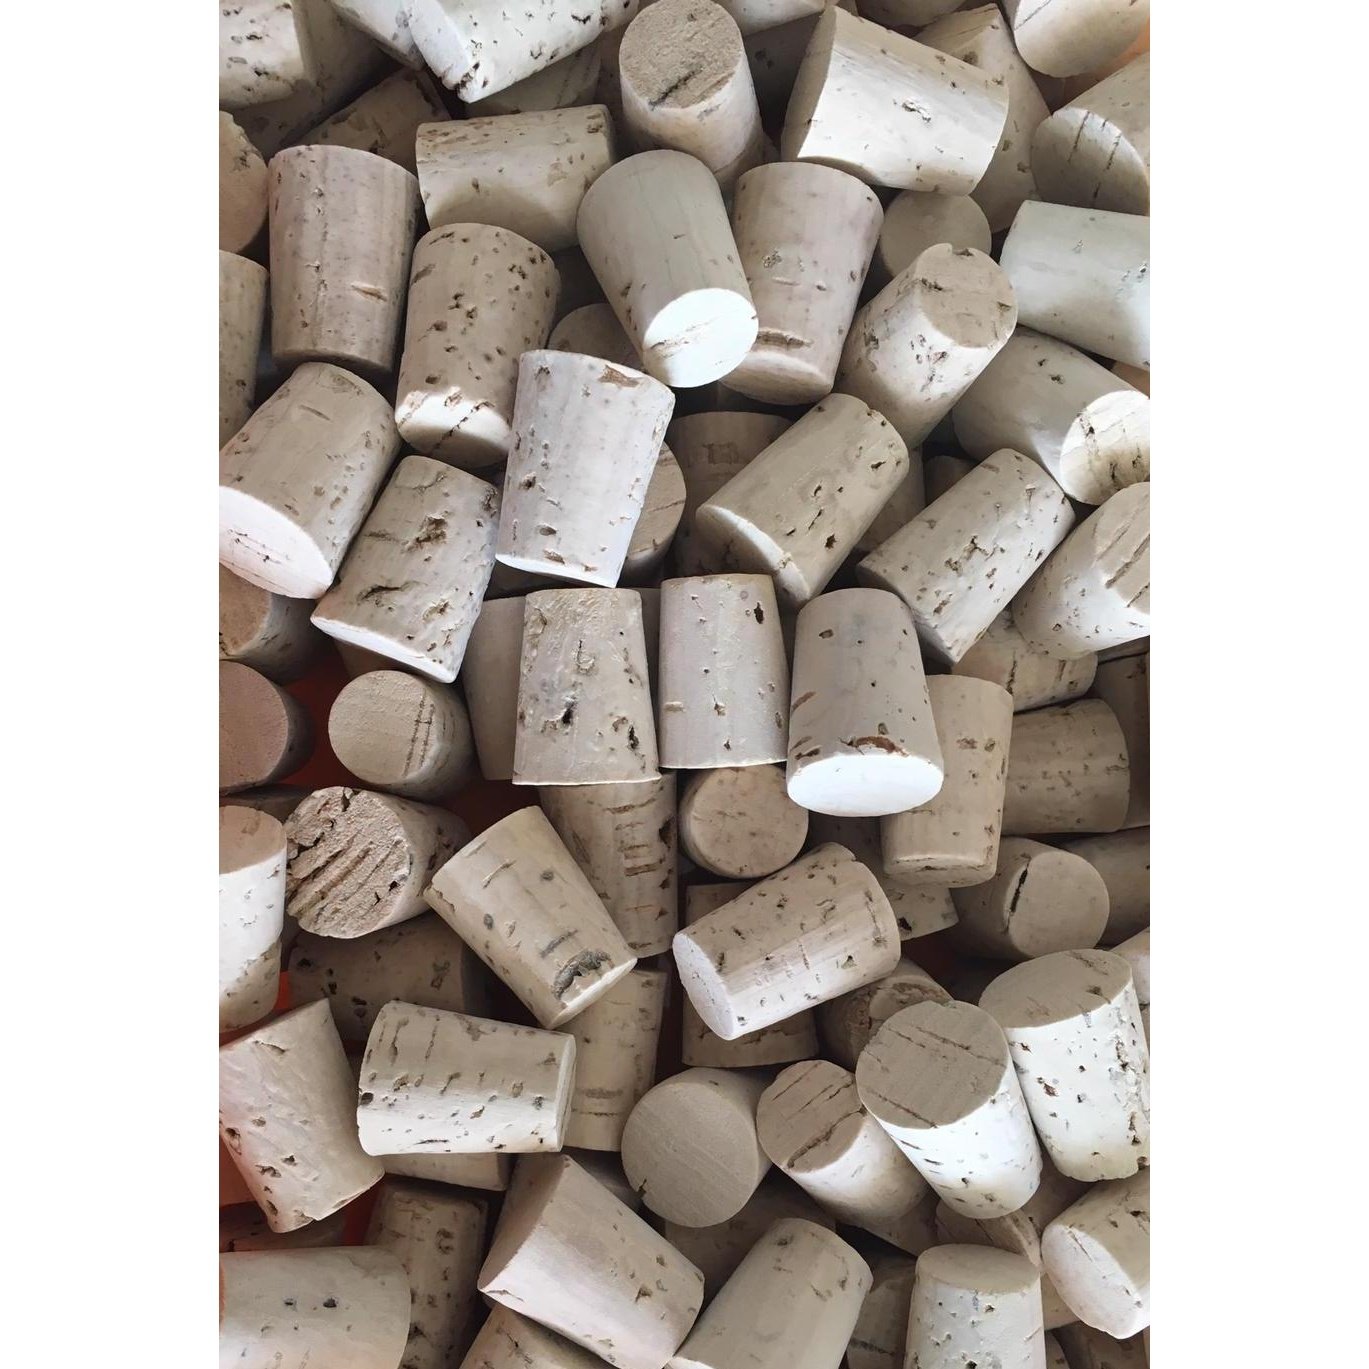 Tapered Cork Stopper - 100 Units